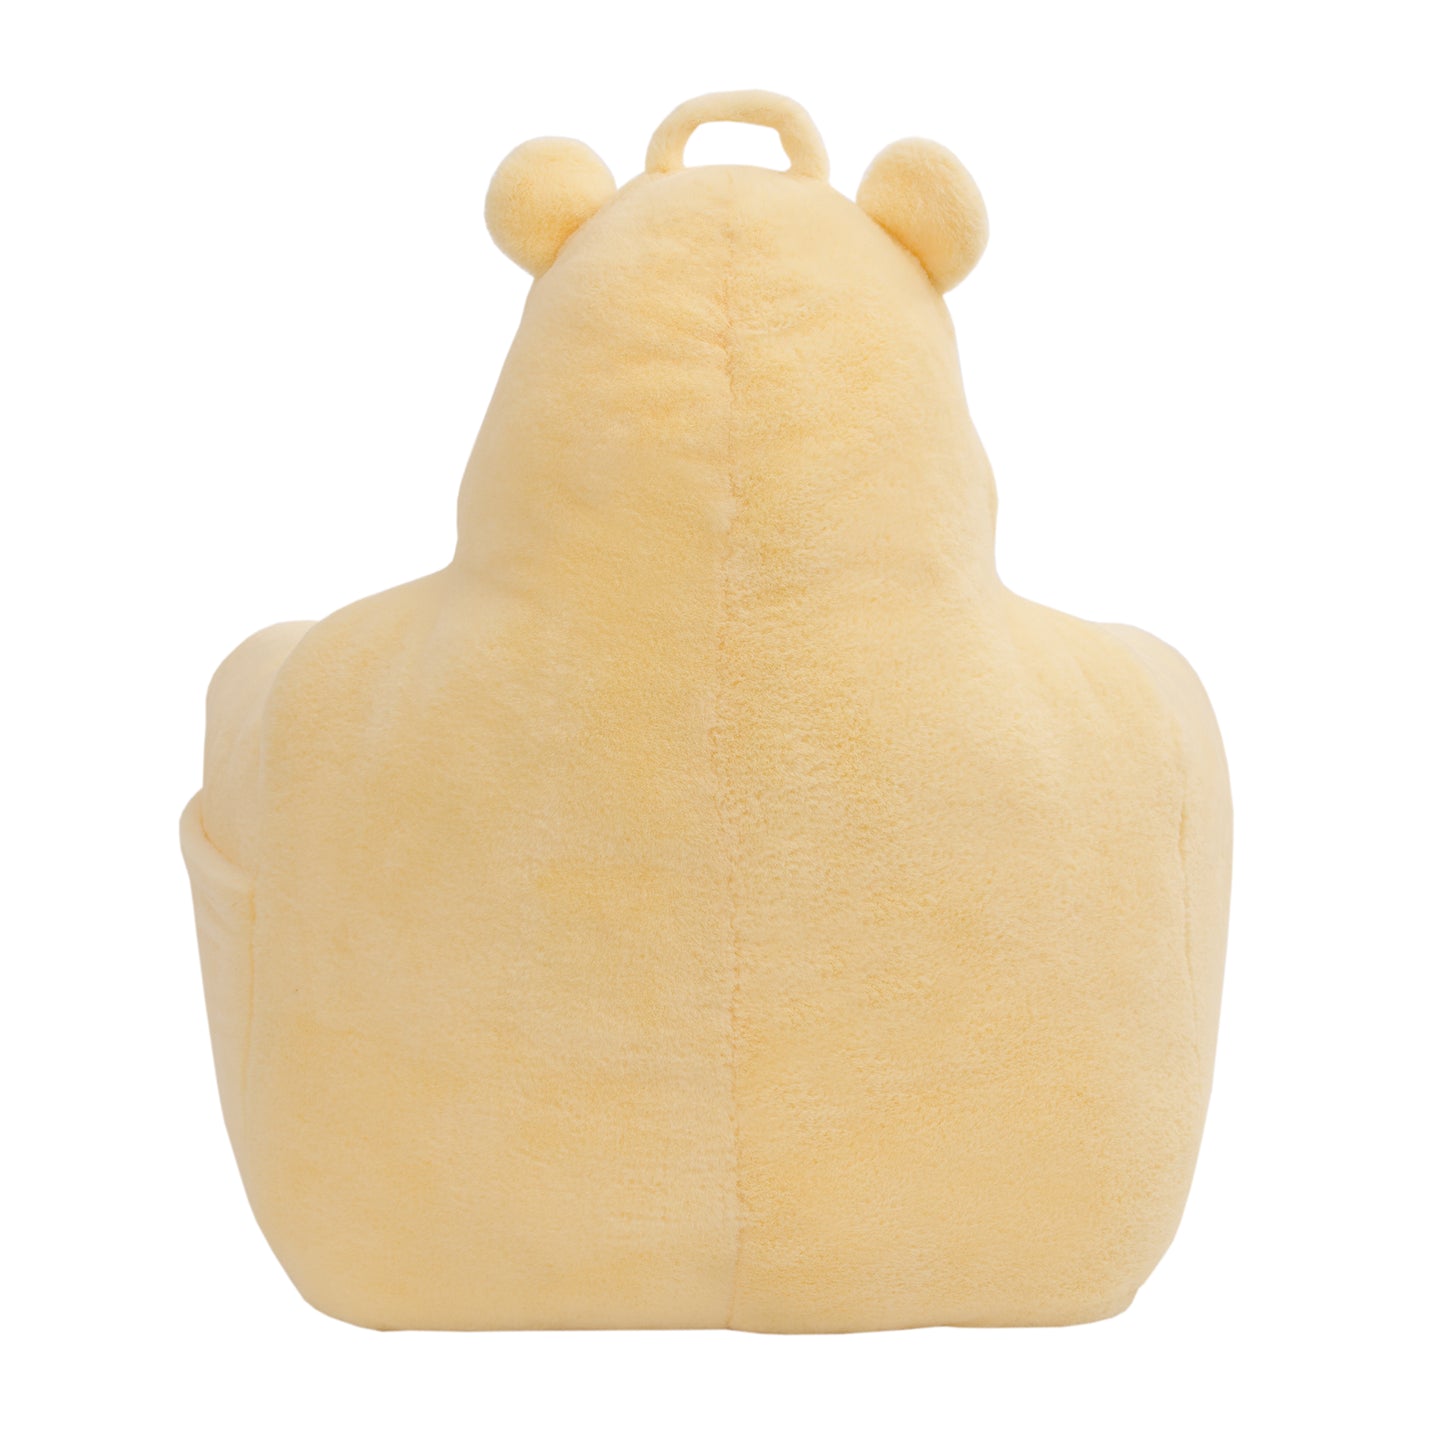 Disney Classic Winnie the Pooh Shaped Yellow, and Brown Plush Chair